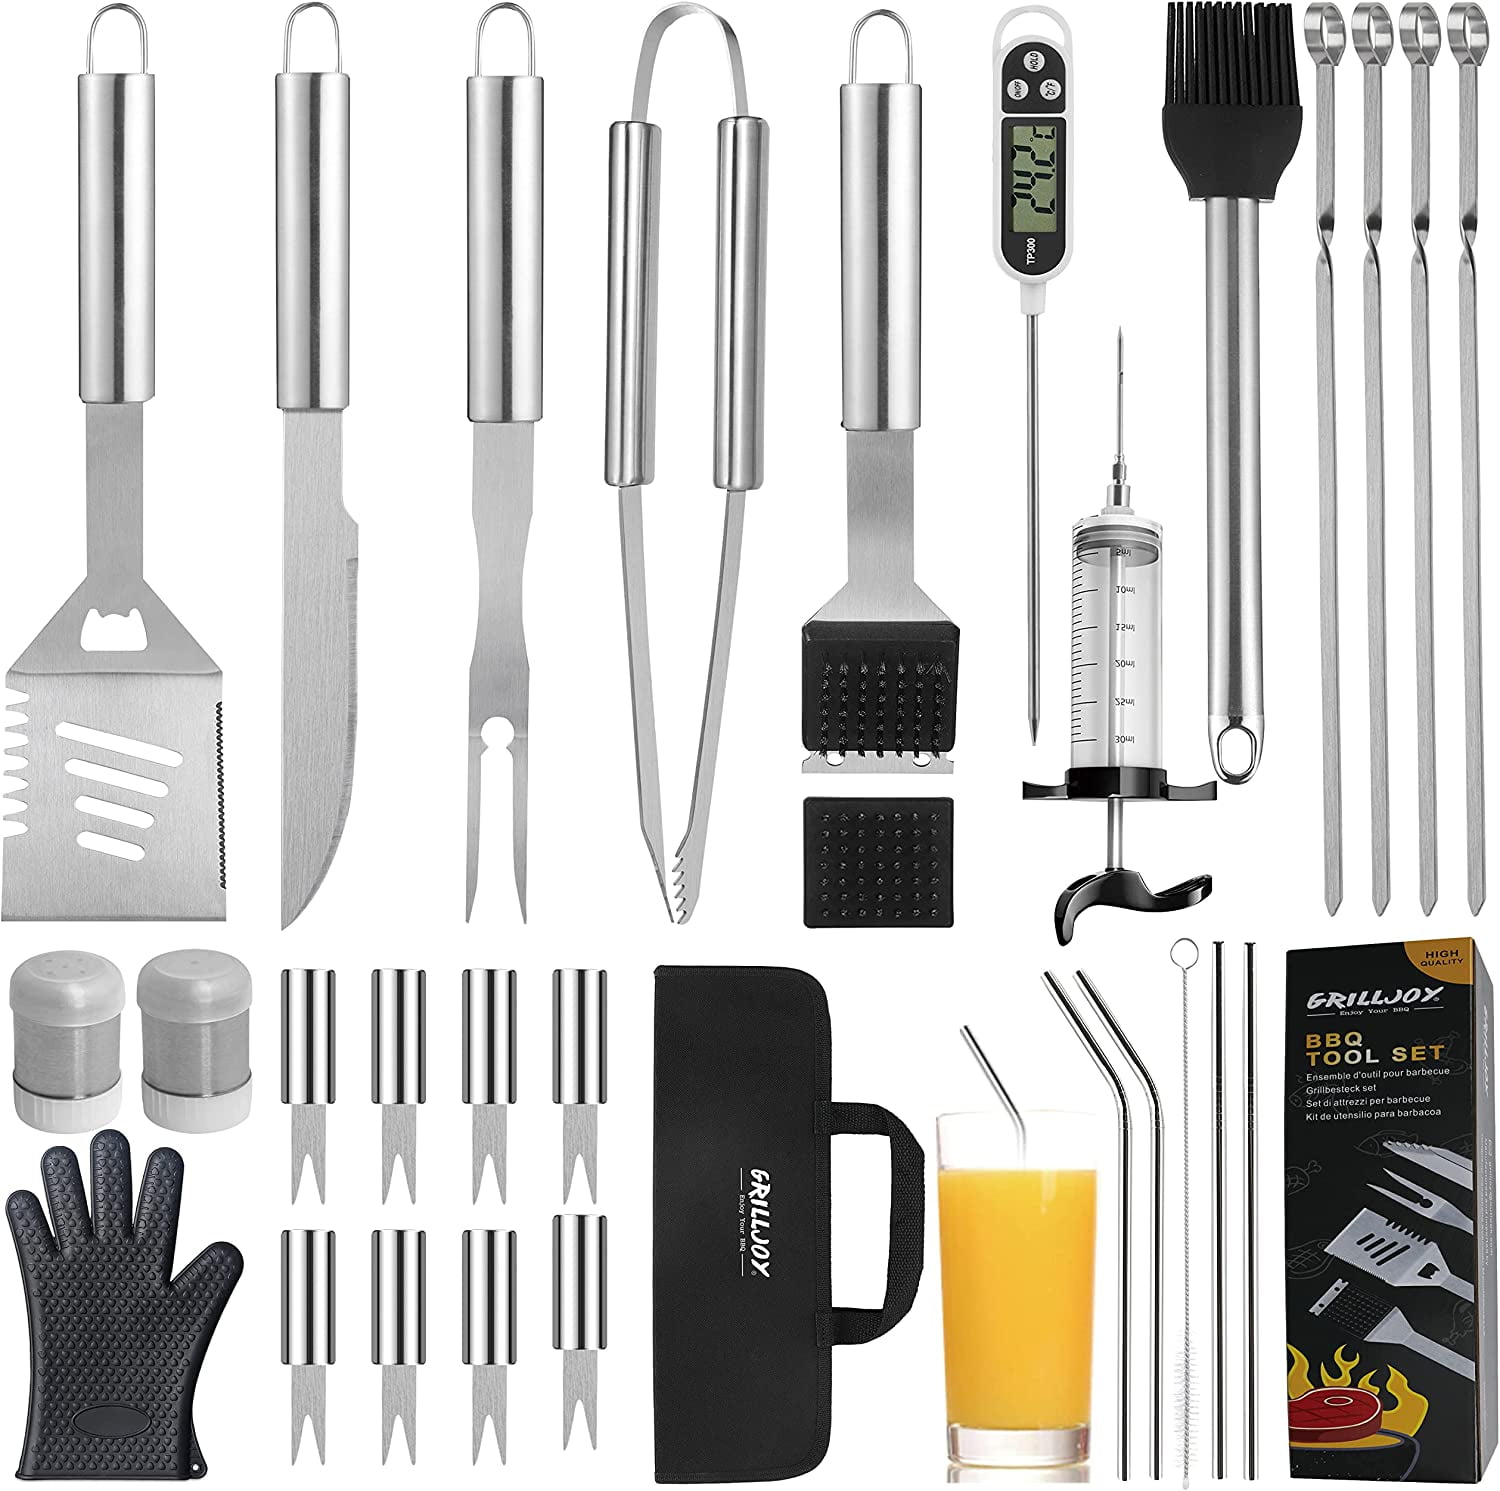 grilljoy 20PCS Heavy Duty BBQ Grill Tools Set - Extra Thick Stainless Steel  Spatula, Fork& Tongs. Complete Barbecue Accessories Kit in Aluminum